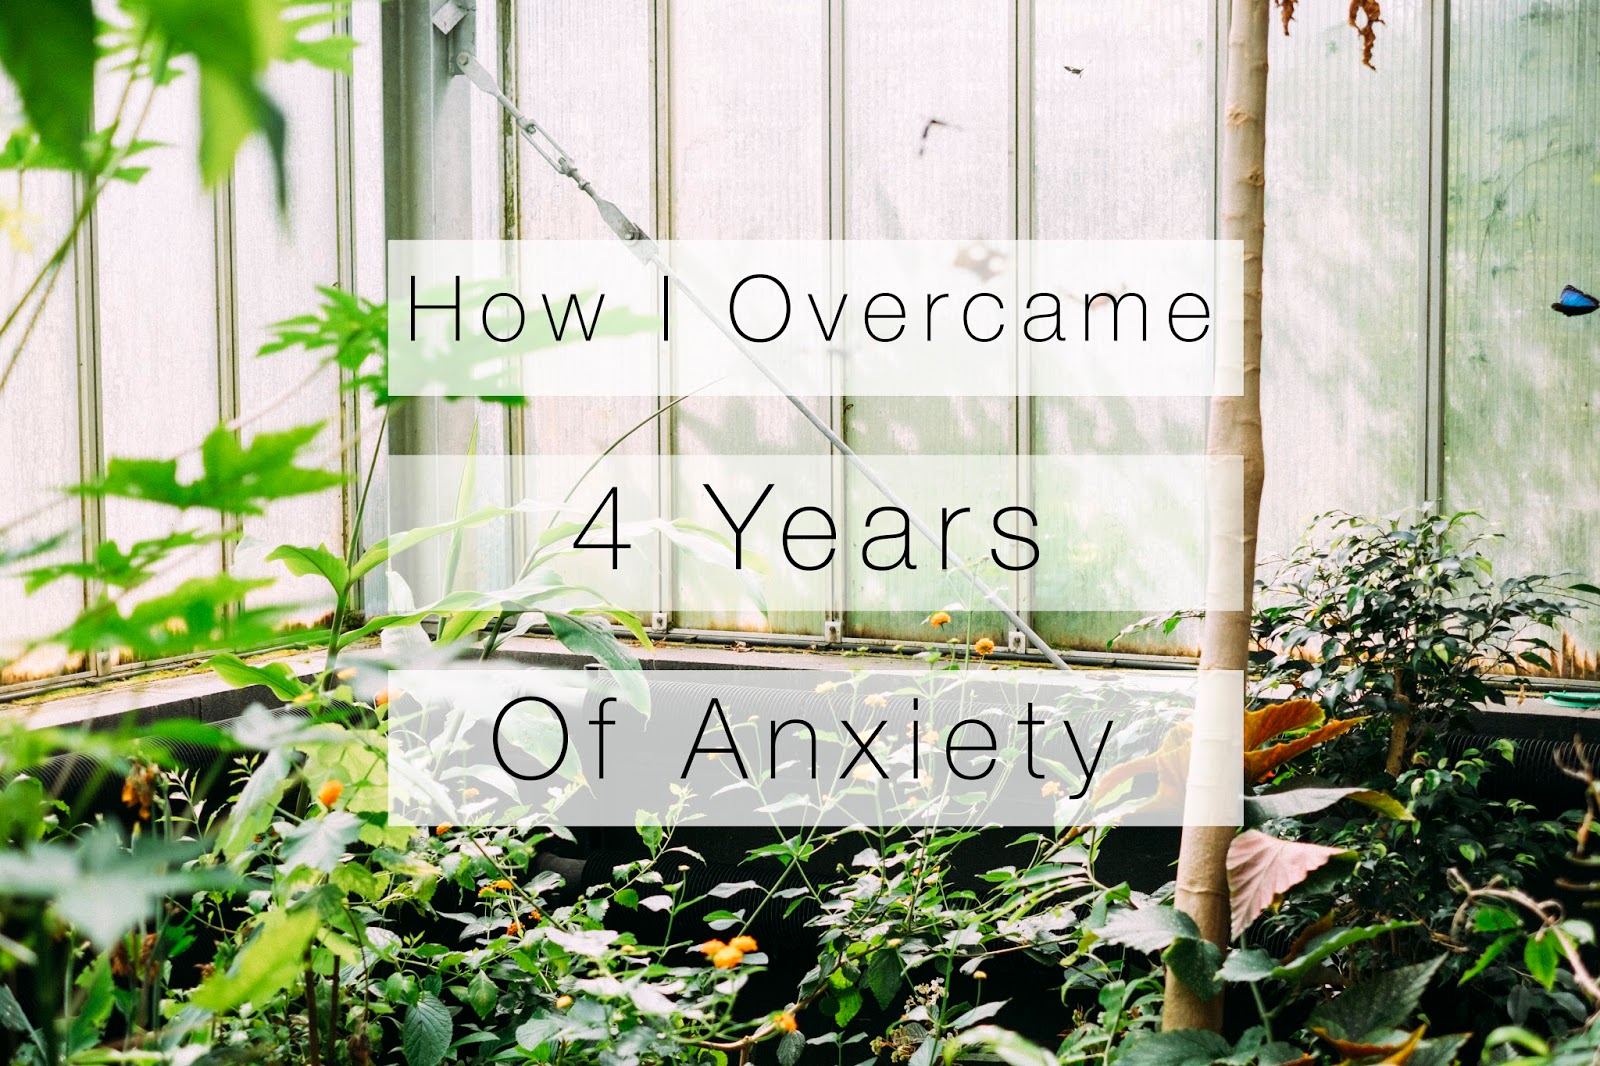 How I Overcame 4 Years of Anxiety